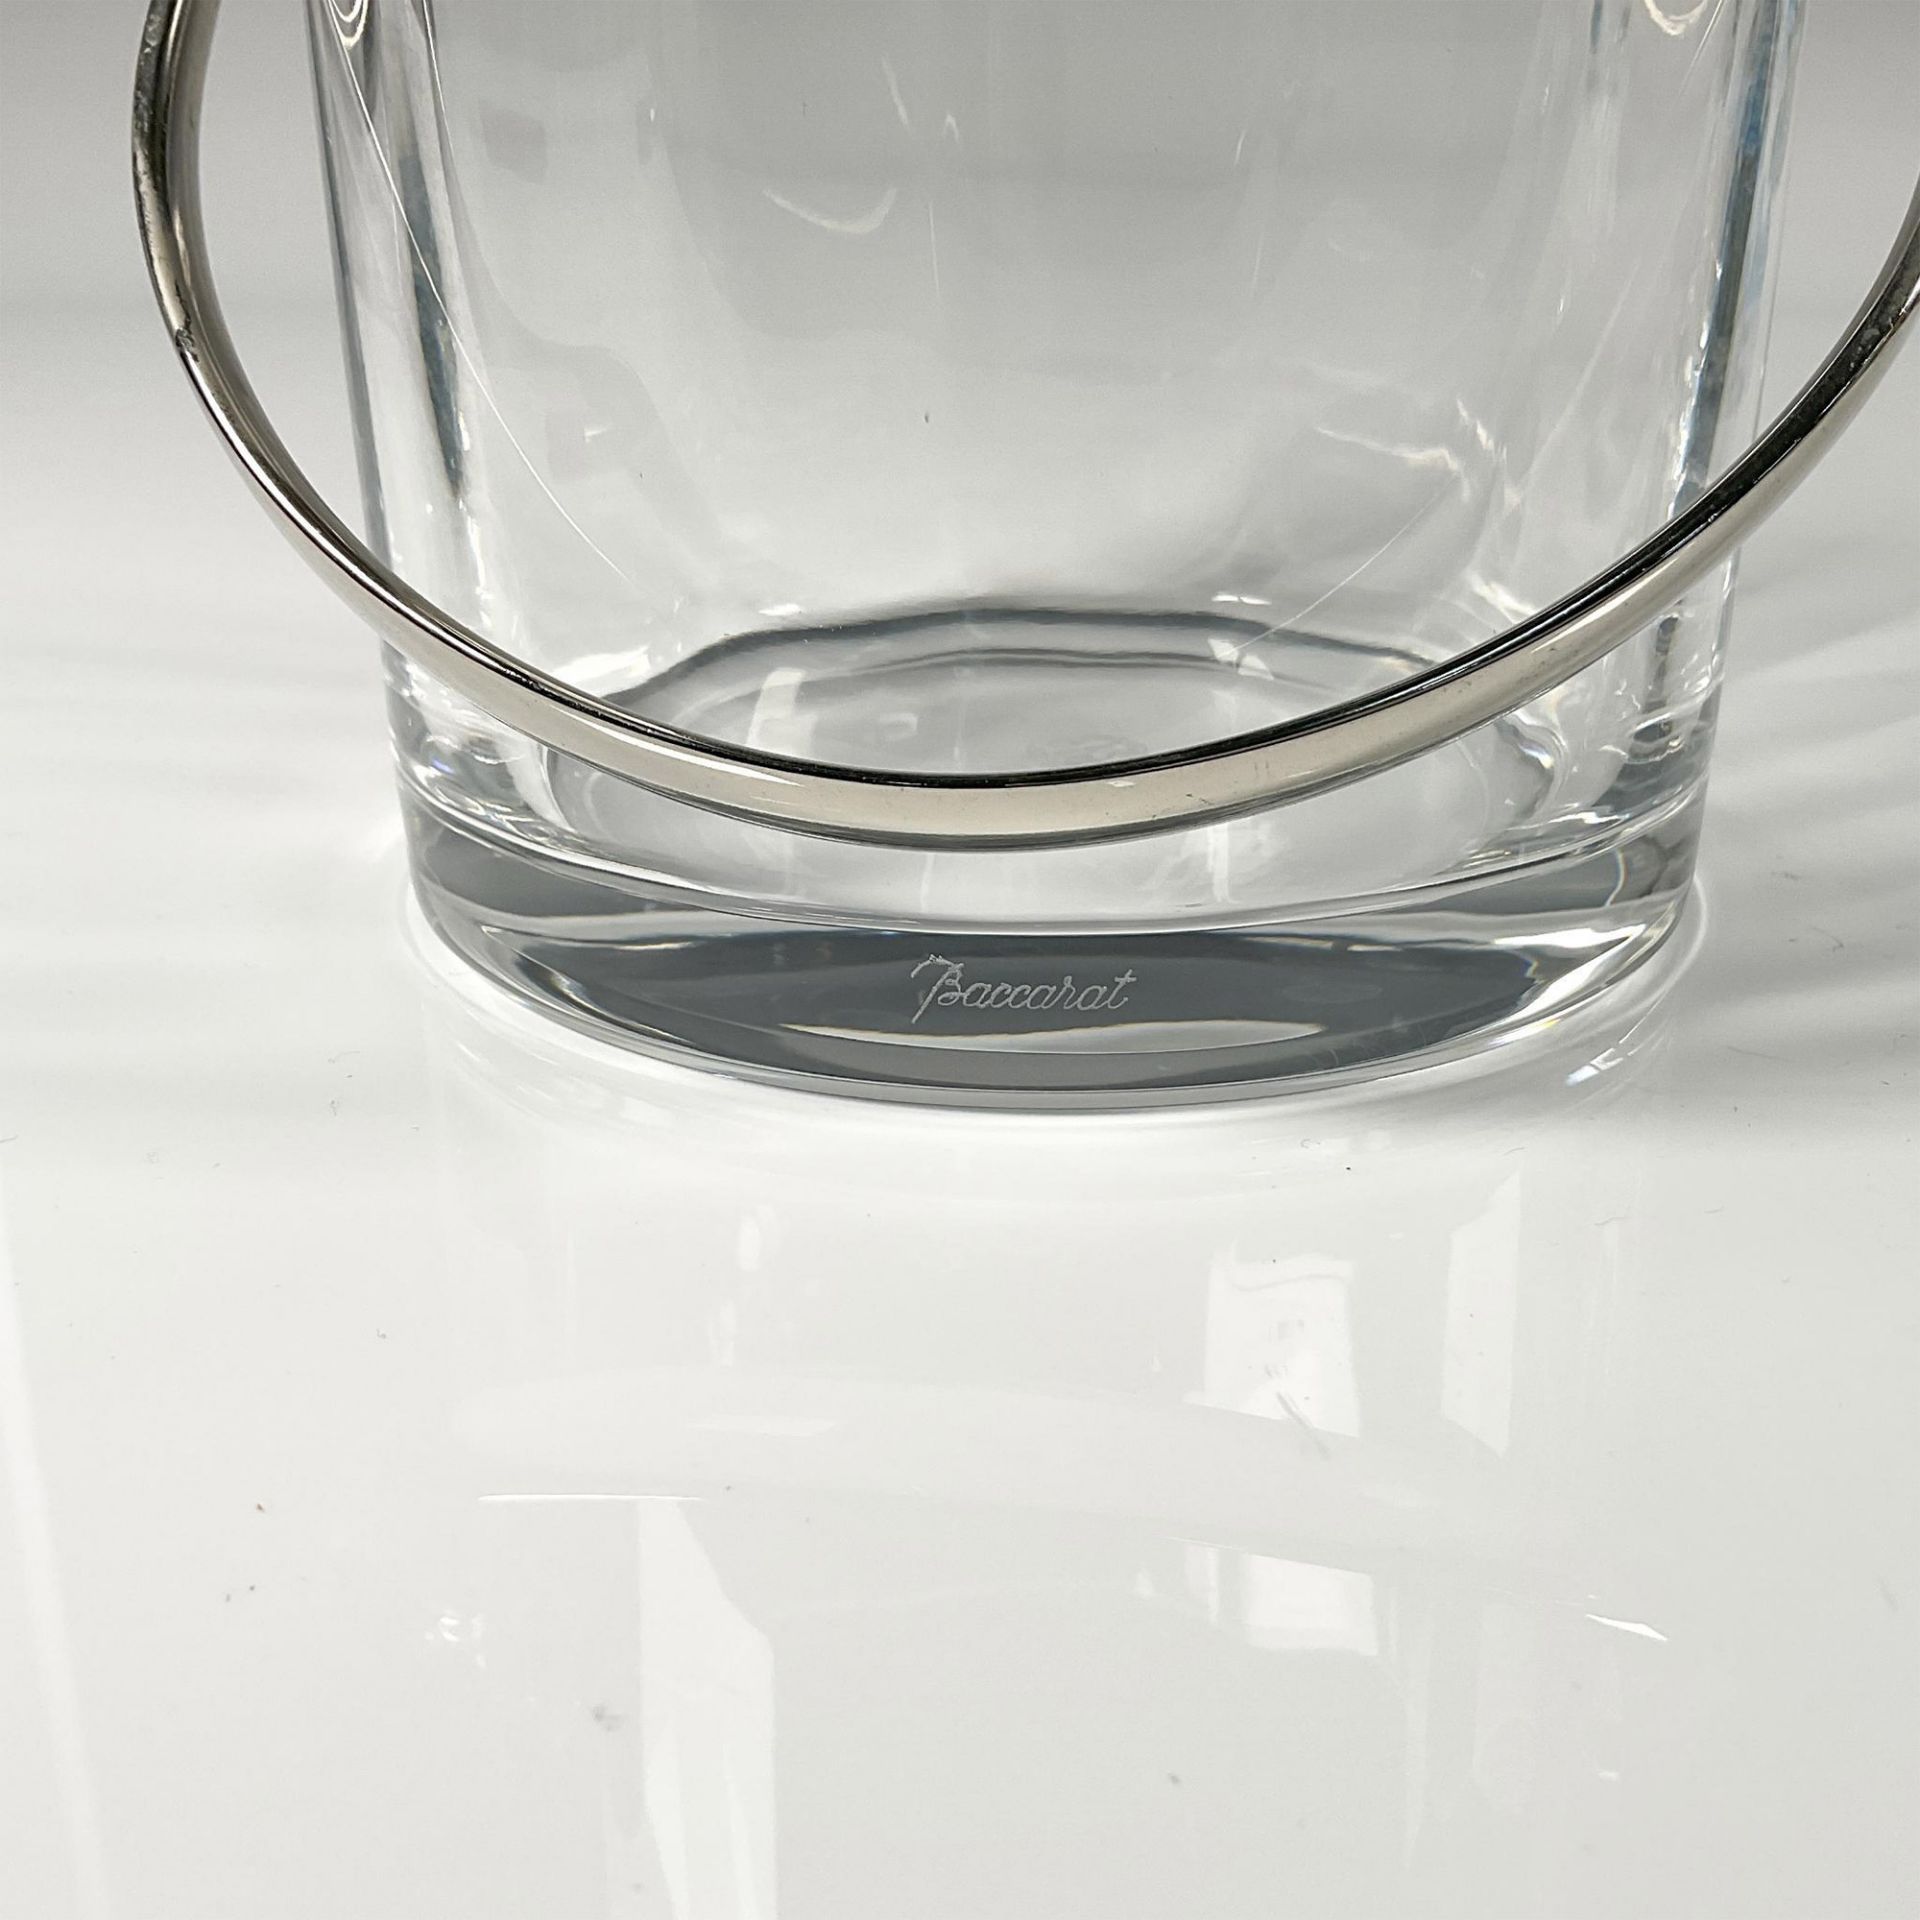 Baccarat Crystal Ice Bucket with Silver Handle - Image 4 of 4